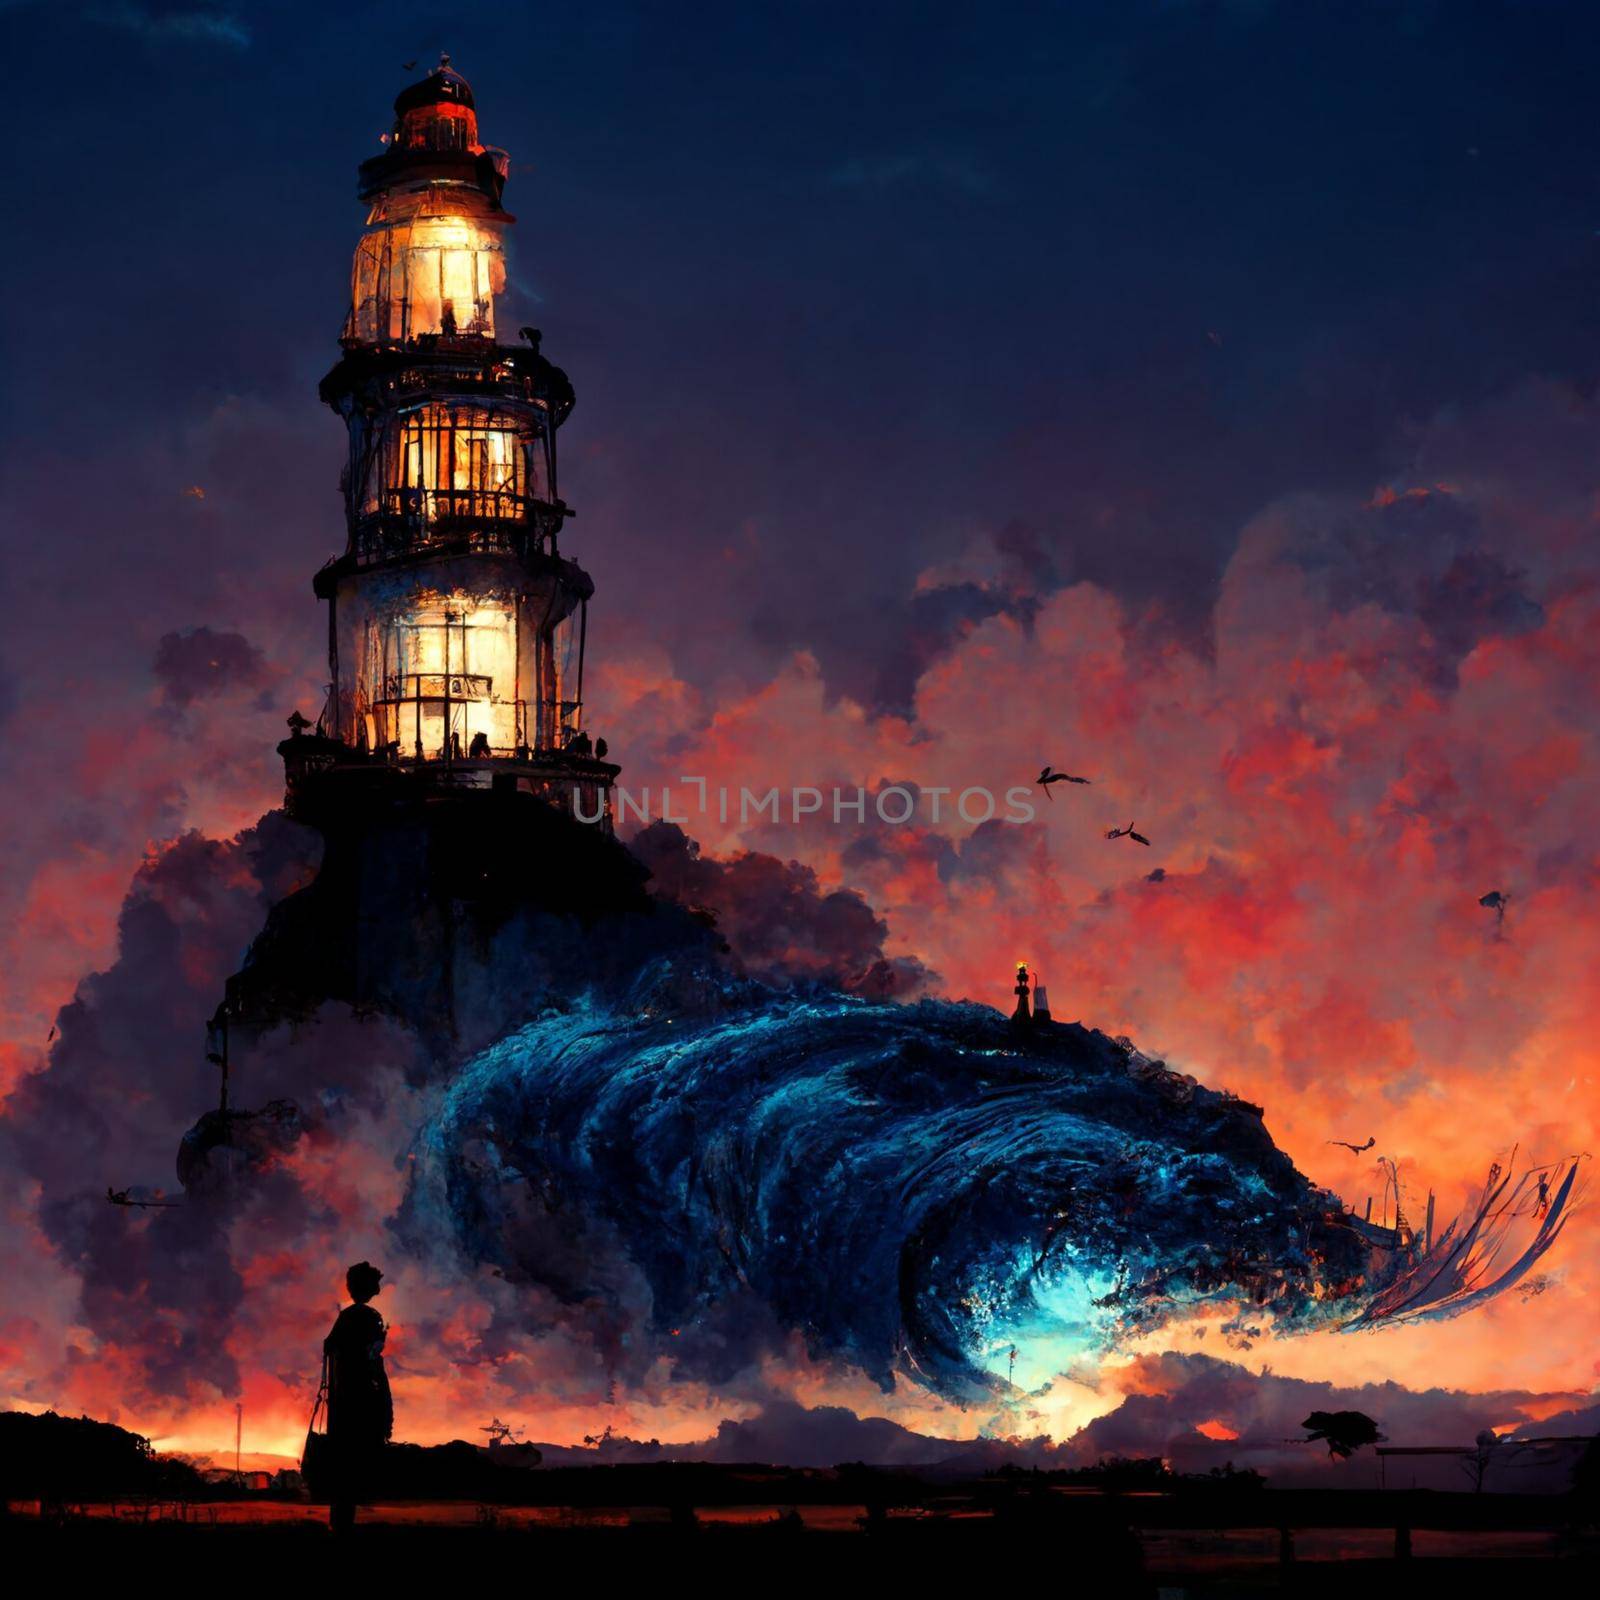 Abstract illustration of a lighthouse at sunset. evening